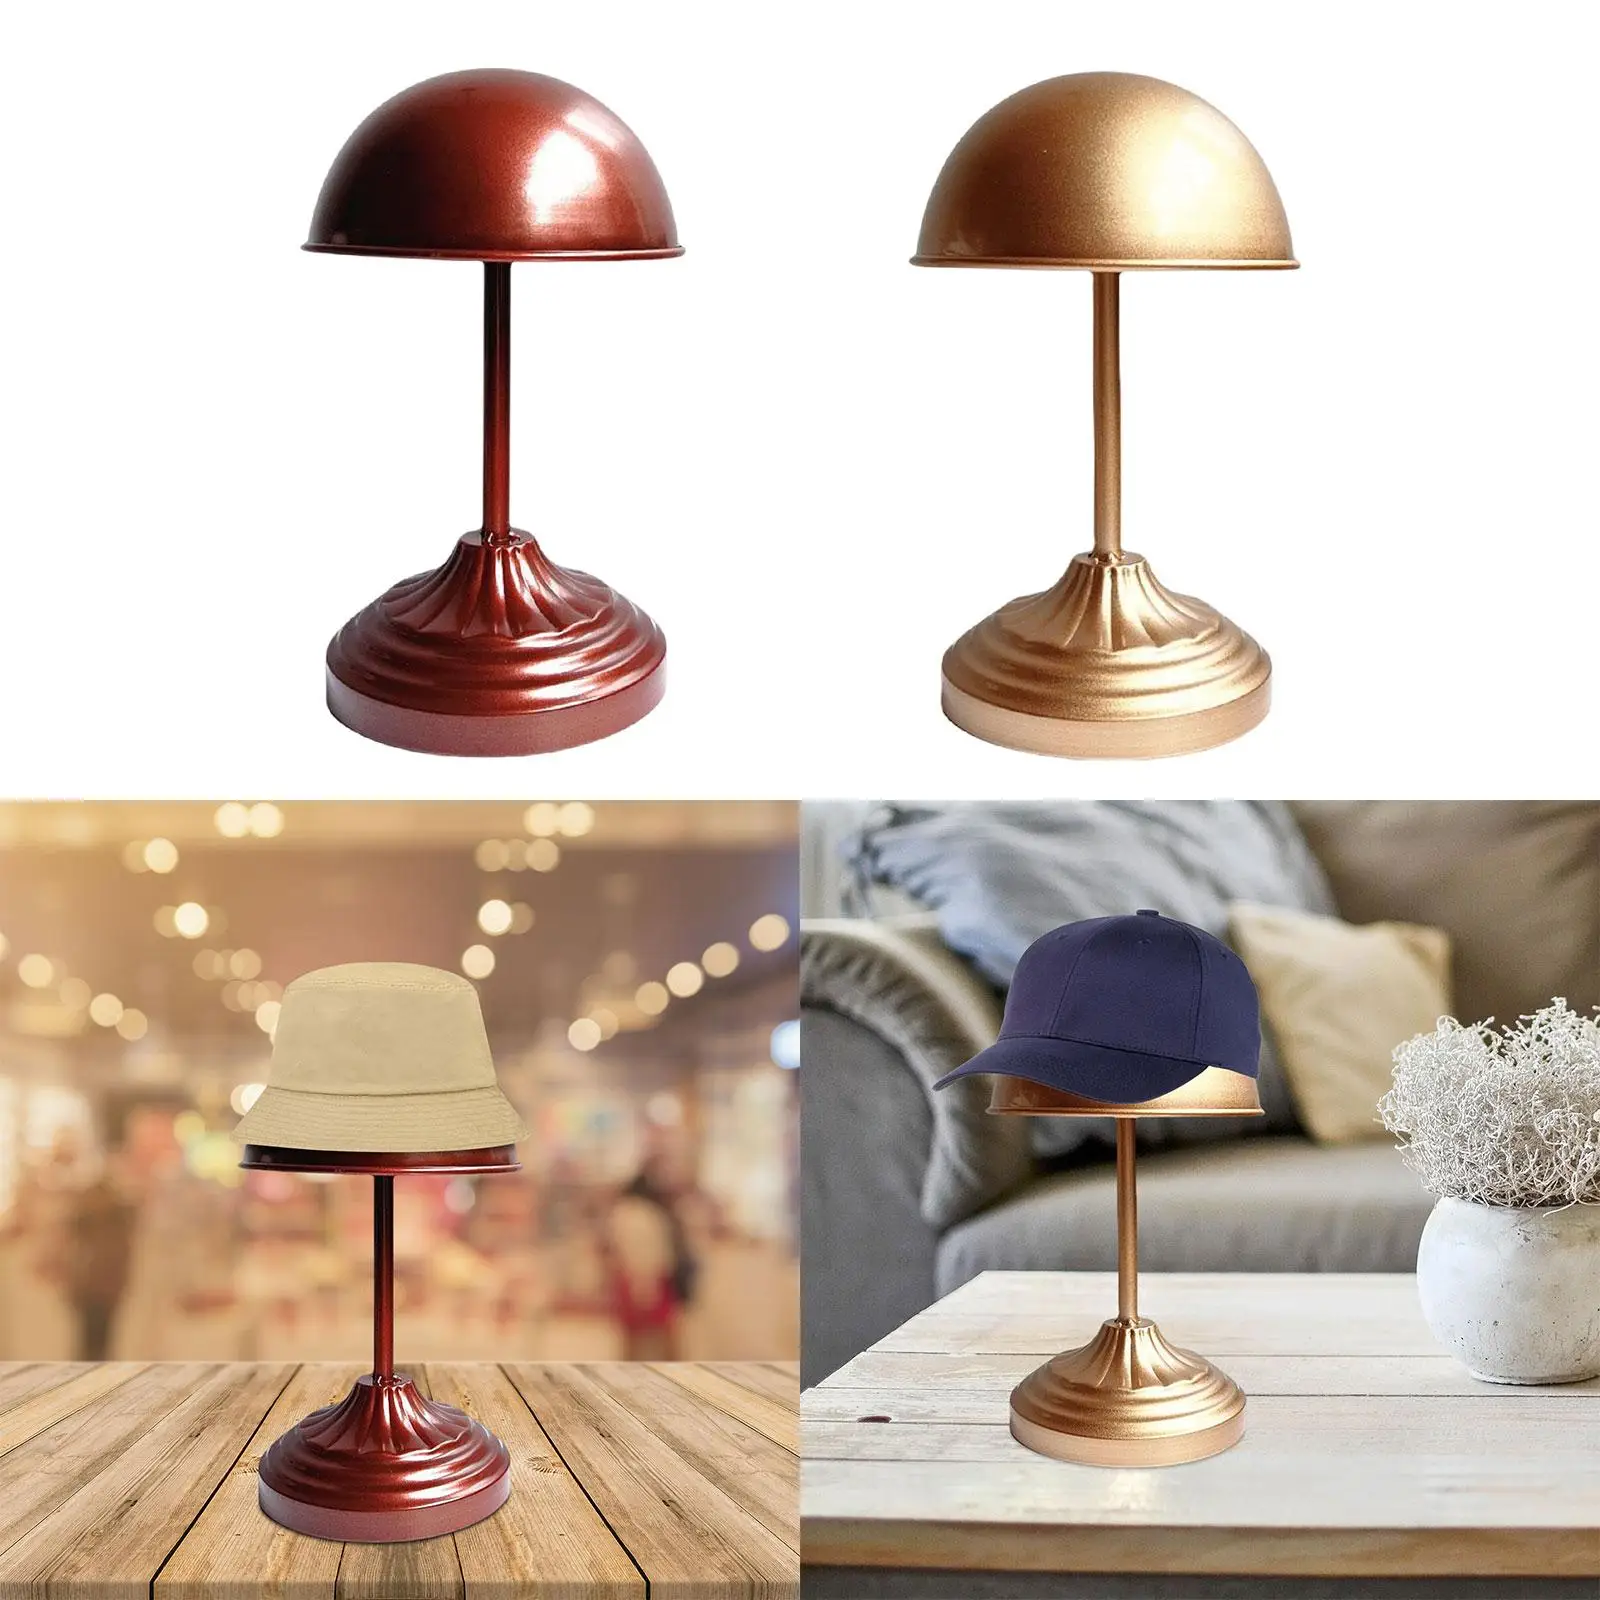 Hat Stand Freestanding Vintage Iron Dome Shape Decoration Cap Organizer Wig Stand Holder Hat Rack for Home Tabletop Shop Styling